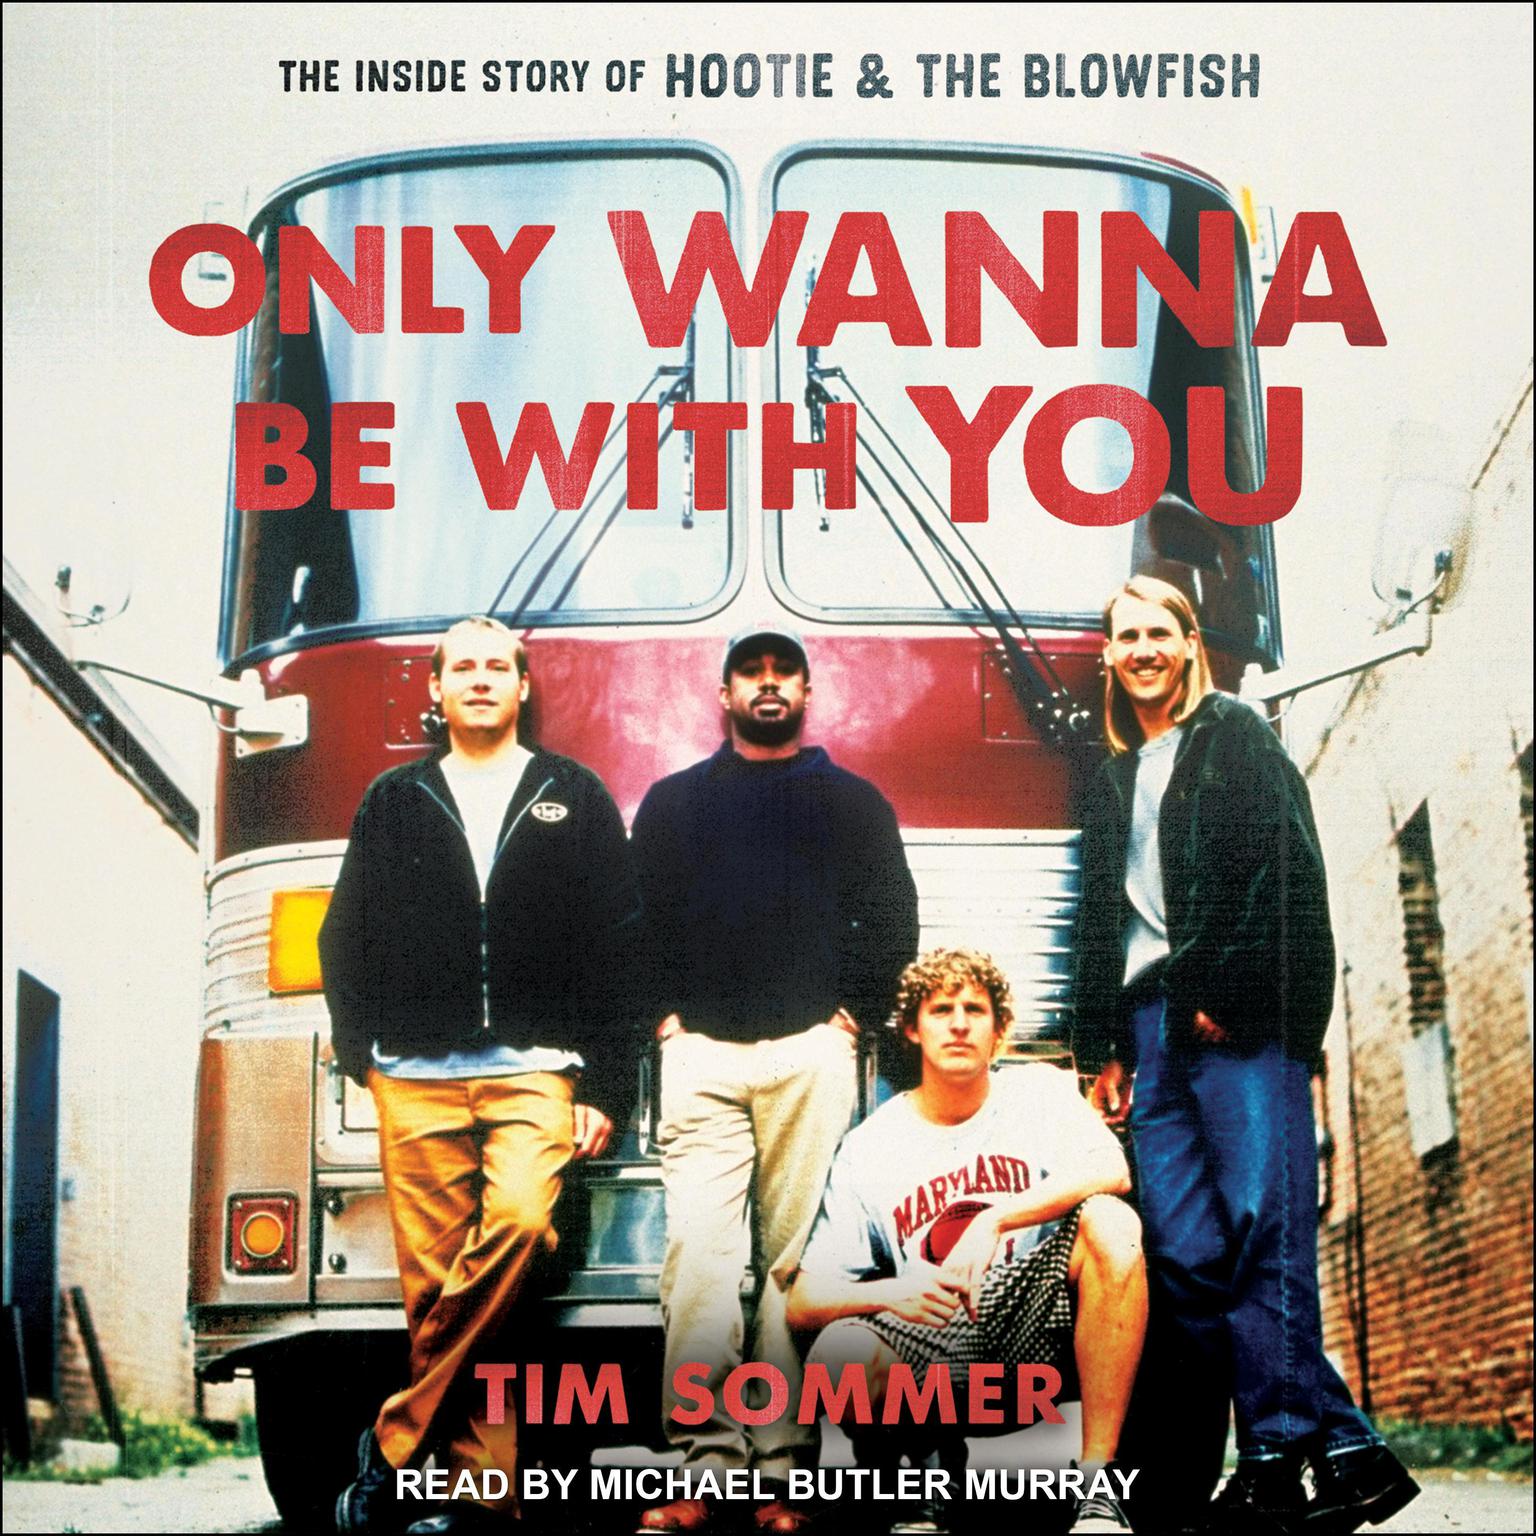 Only Wanna Be with You: The Inside Story of Hootie & the Blowfish Audiobook, by Tim Sommer